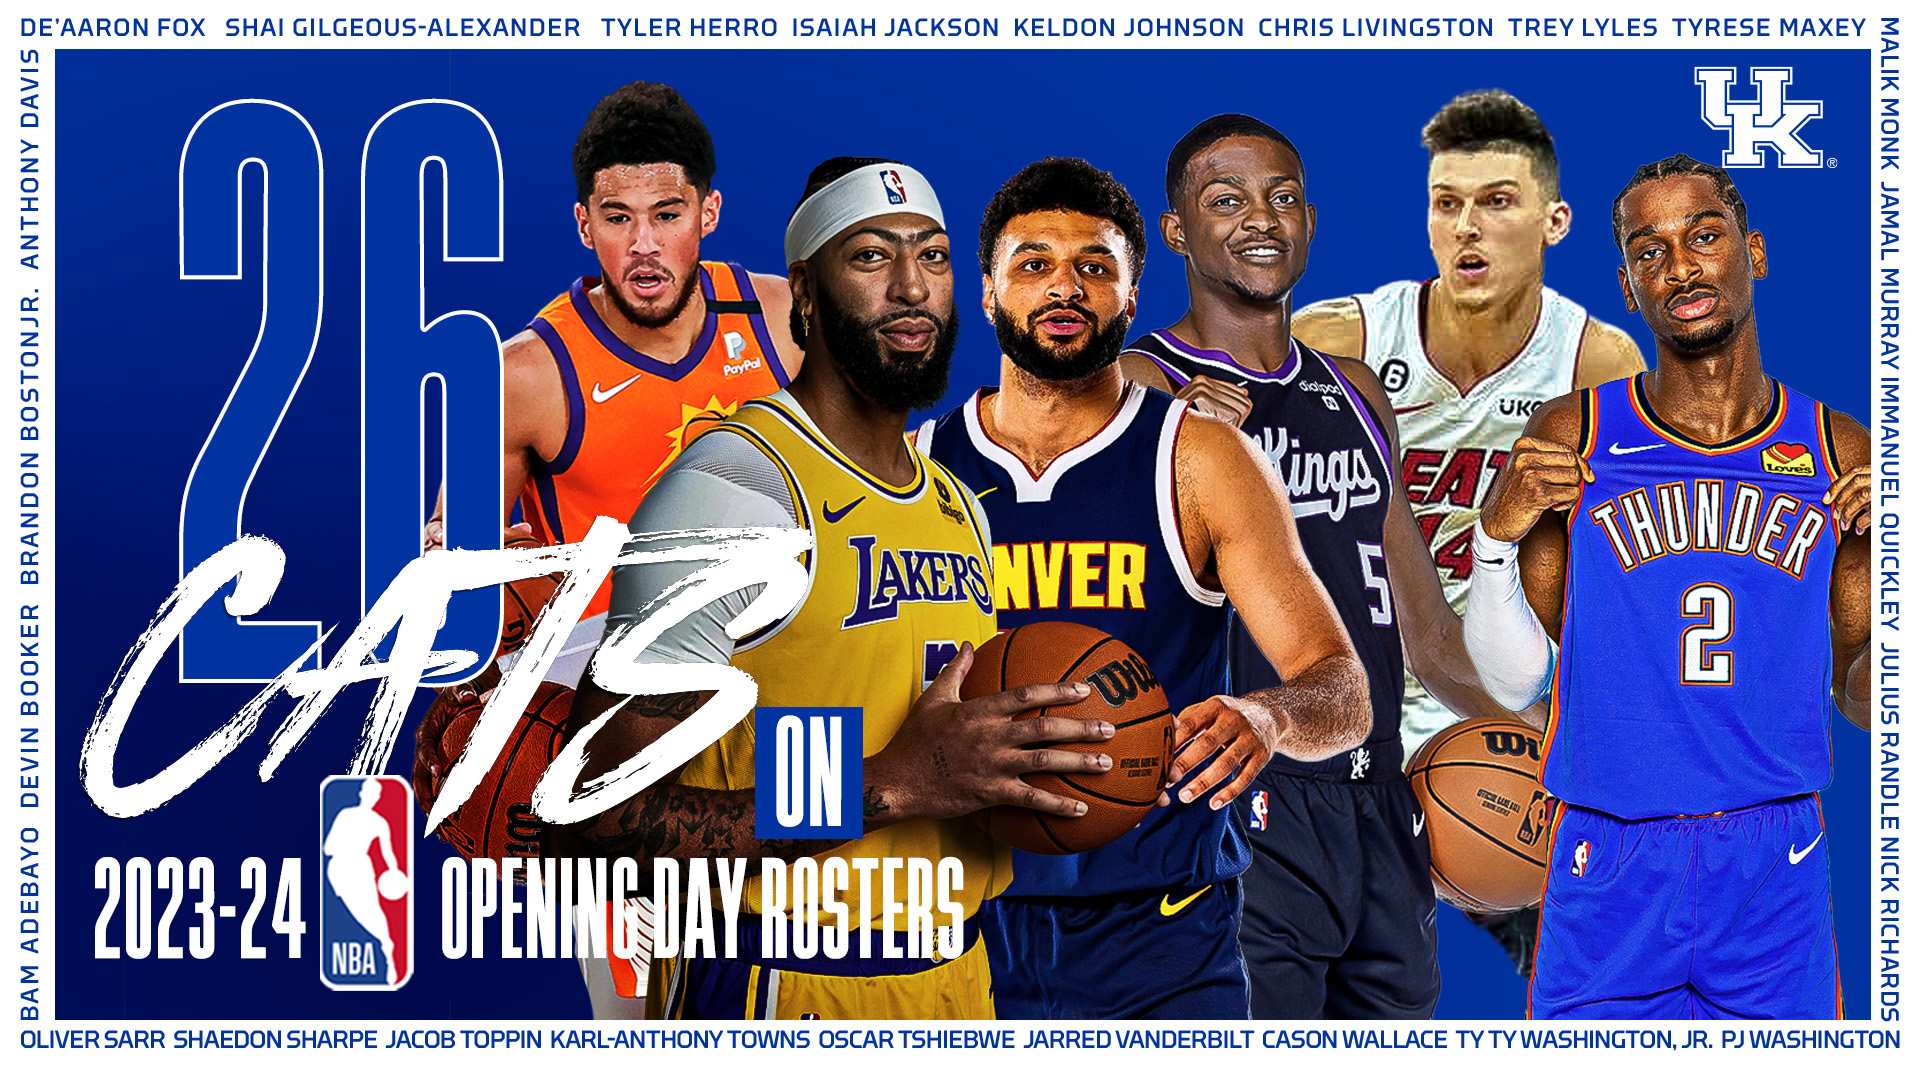 Kentucky Leads Nation with 26 Players on NBA Opening-Day Rosters